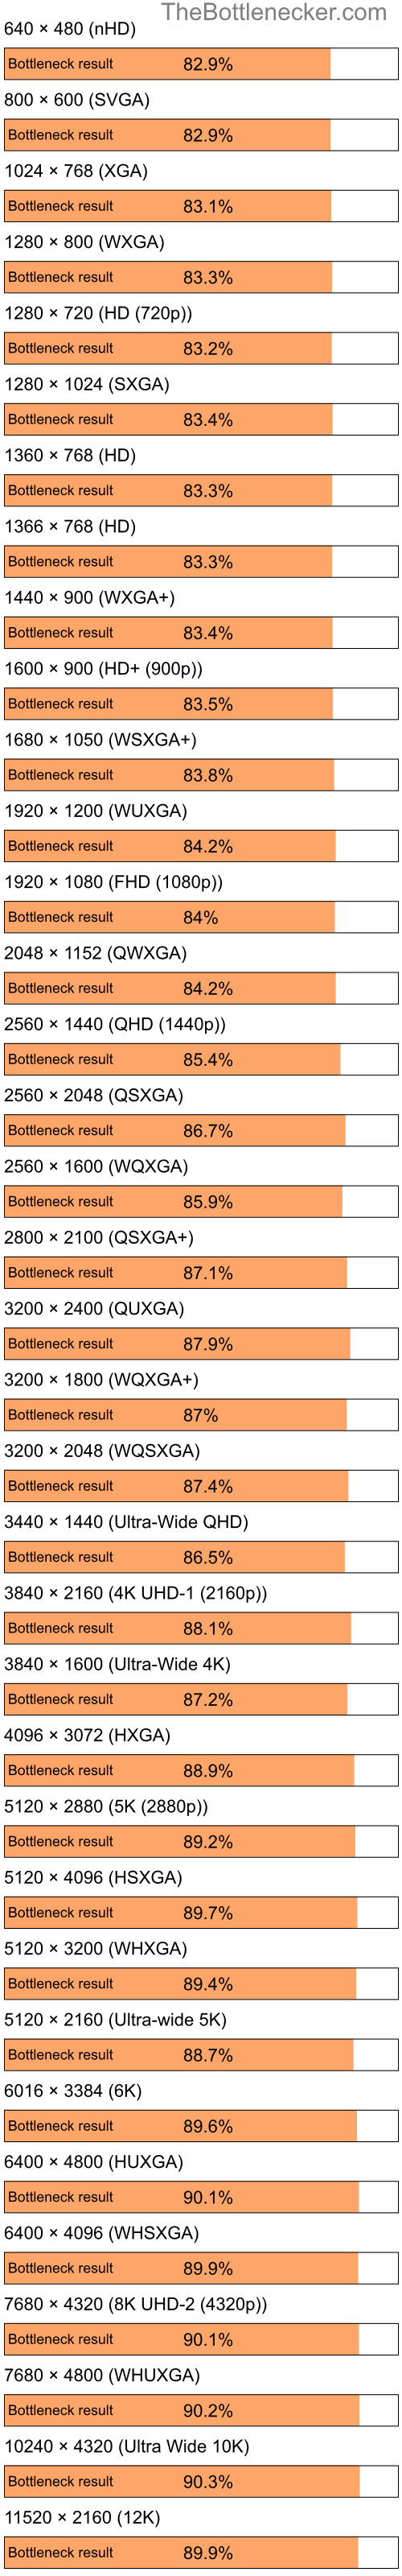 Bottleneck results by resolution for Intel Celeron M and NVIDIA GeForce 6100 in Graphic Card Intense Tasks